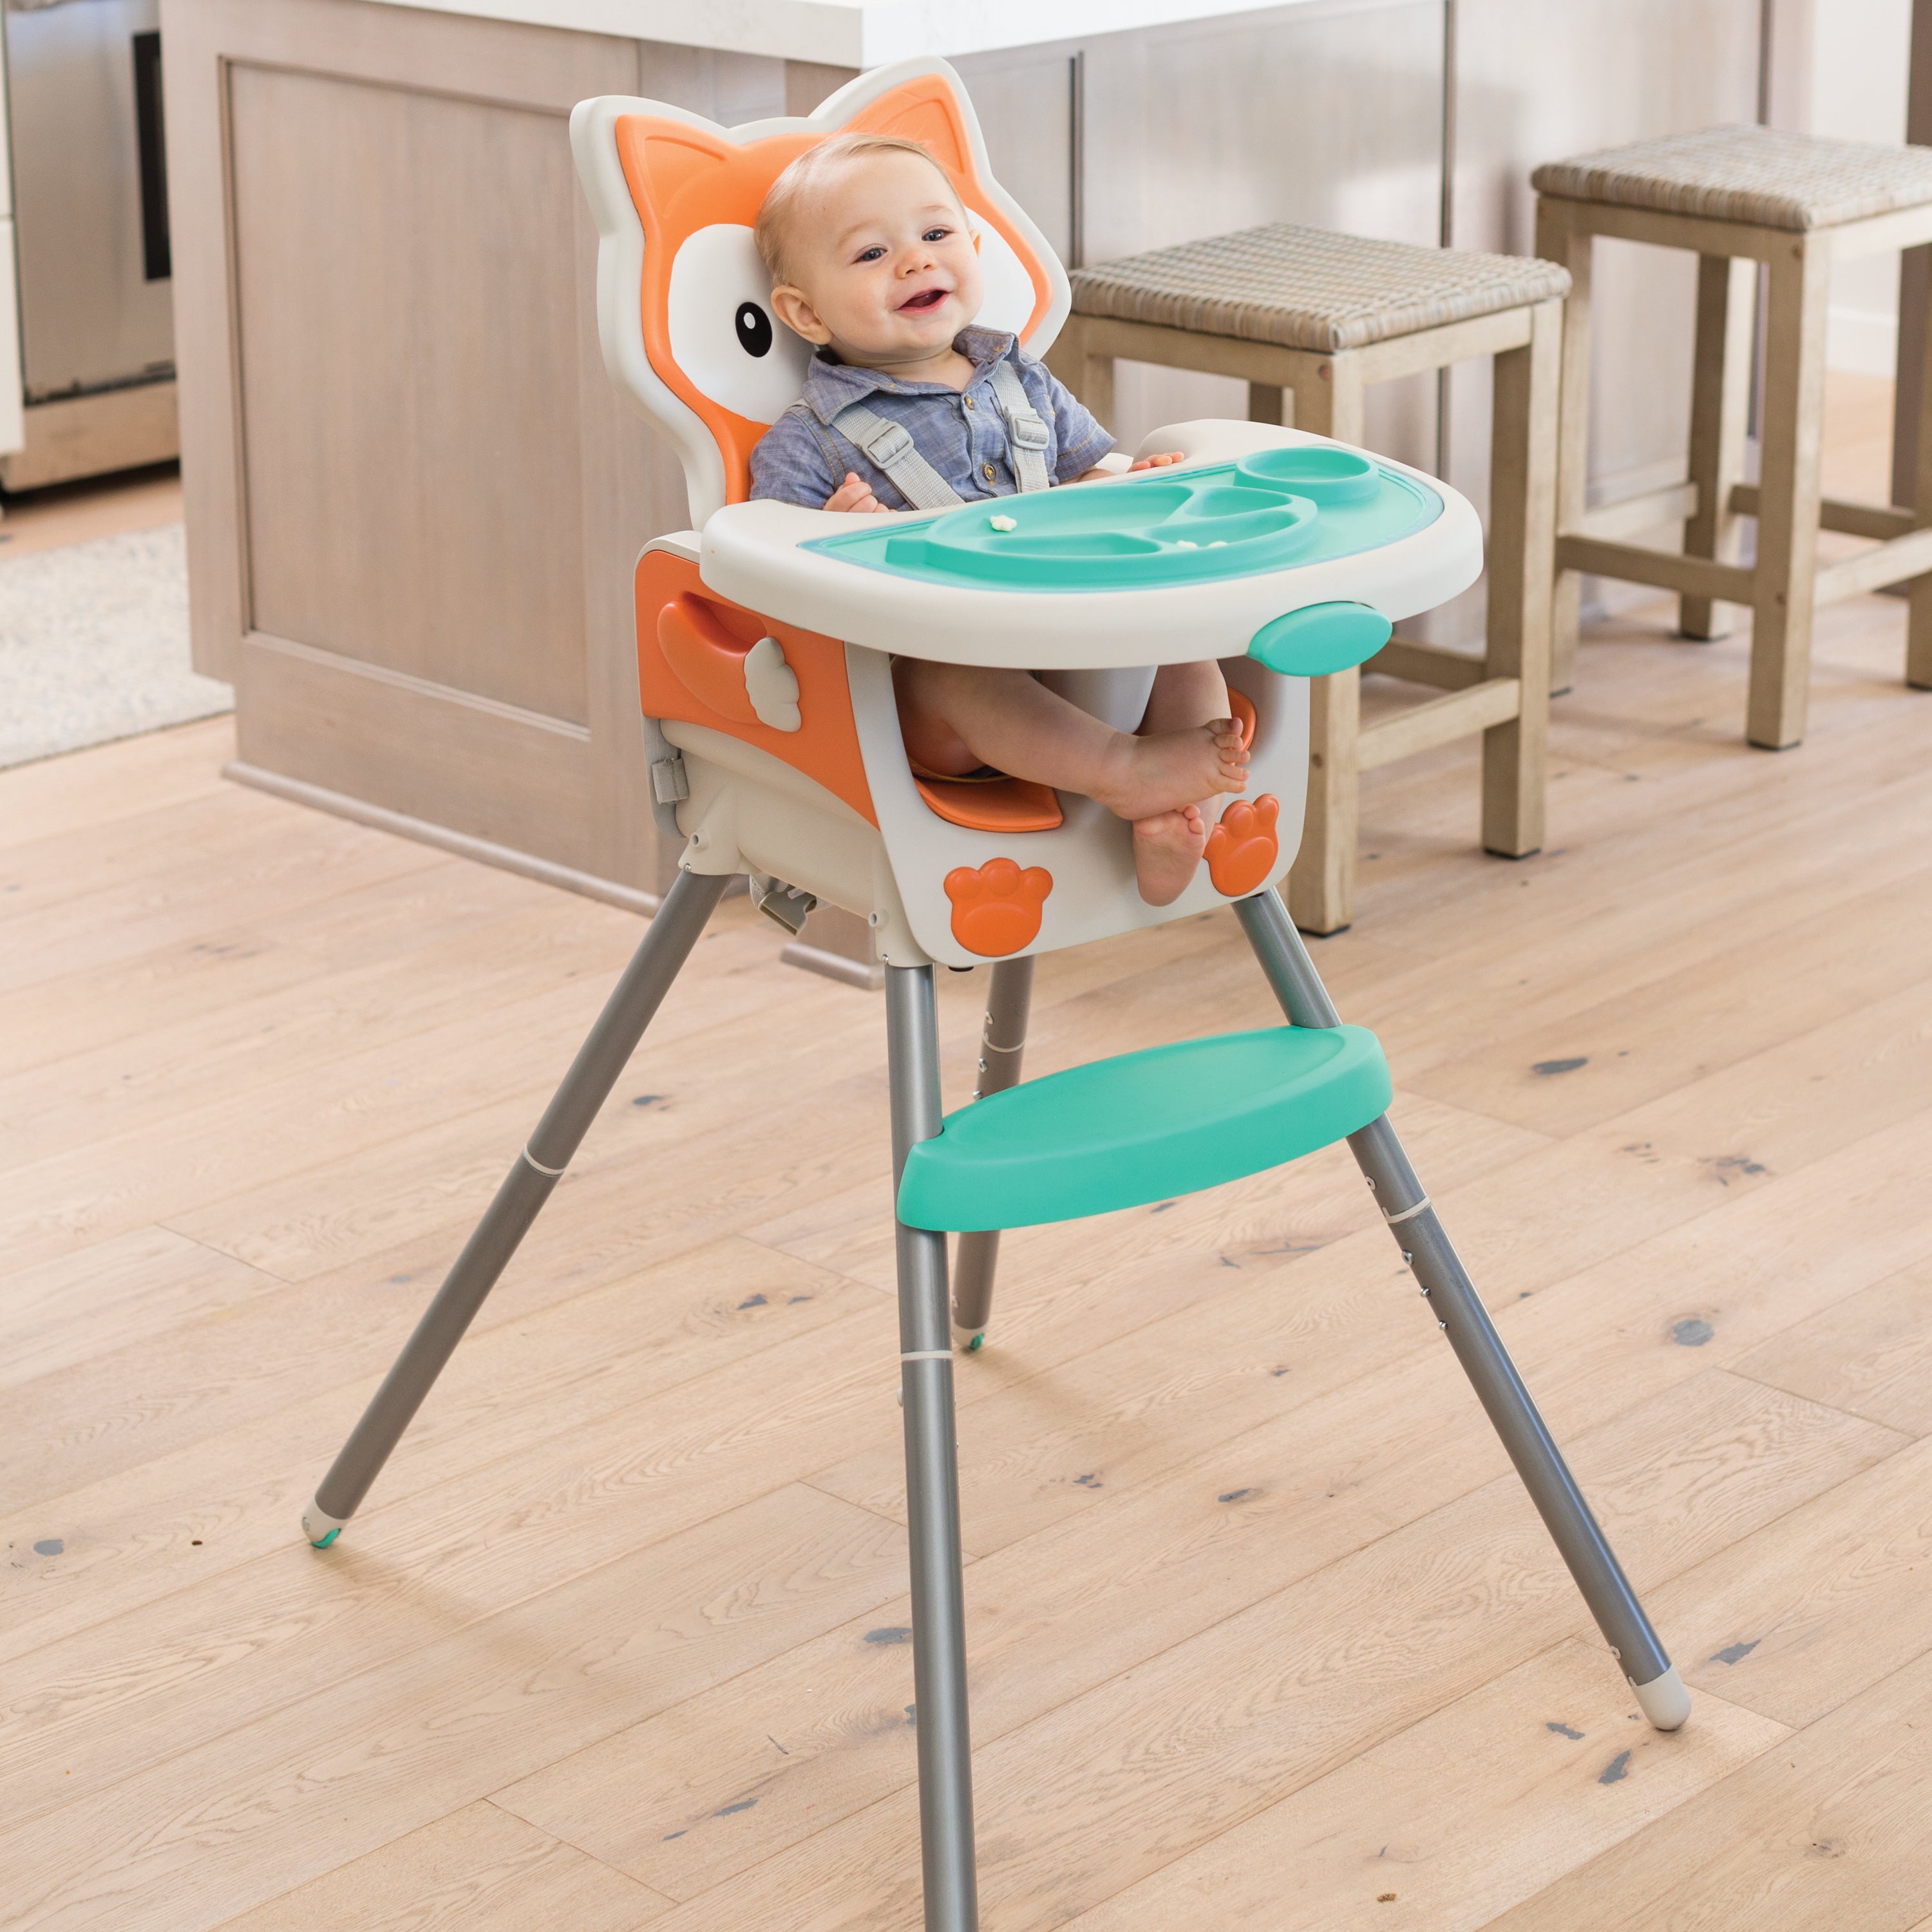 Infantino - Grow-With-Me 4-In-1 Convertible Hight Chair - Fox